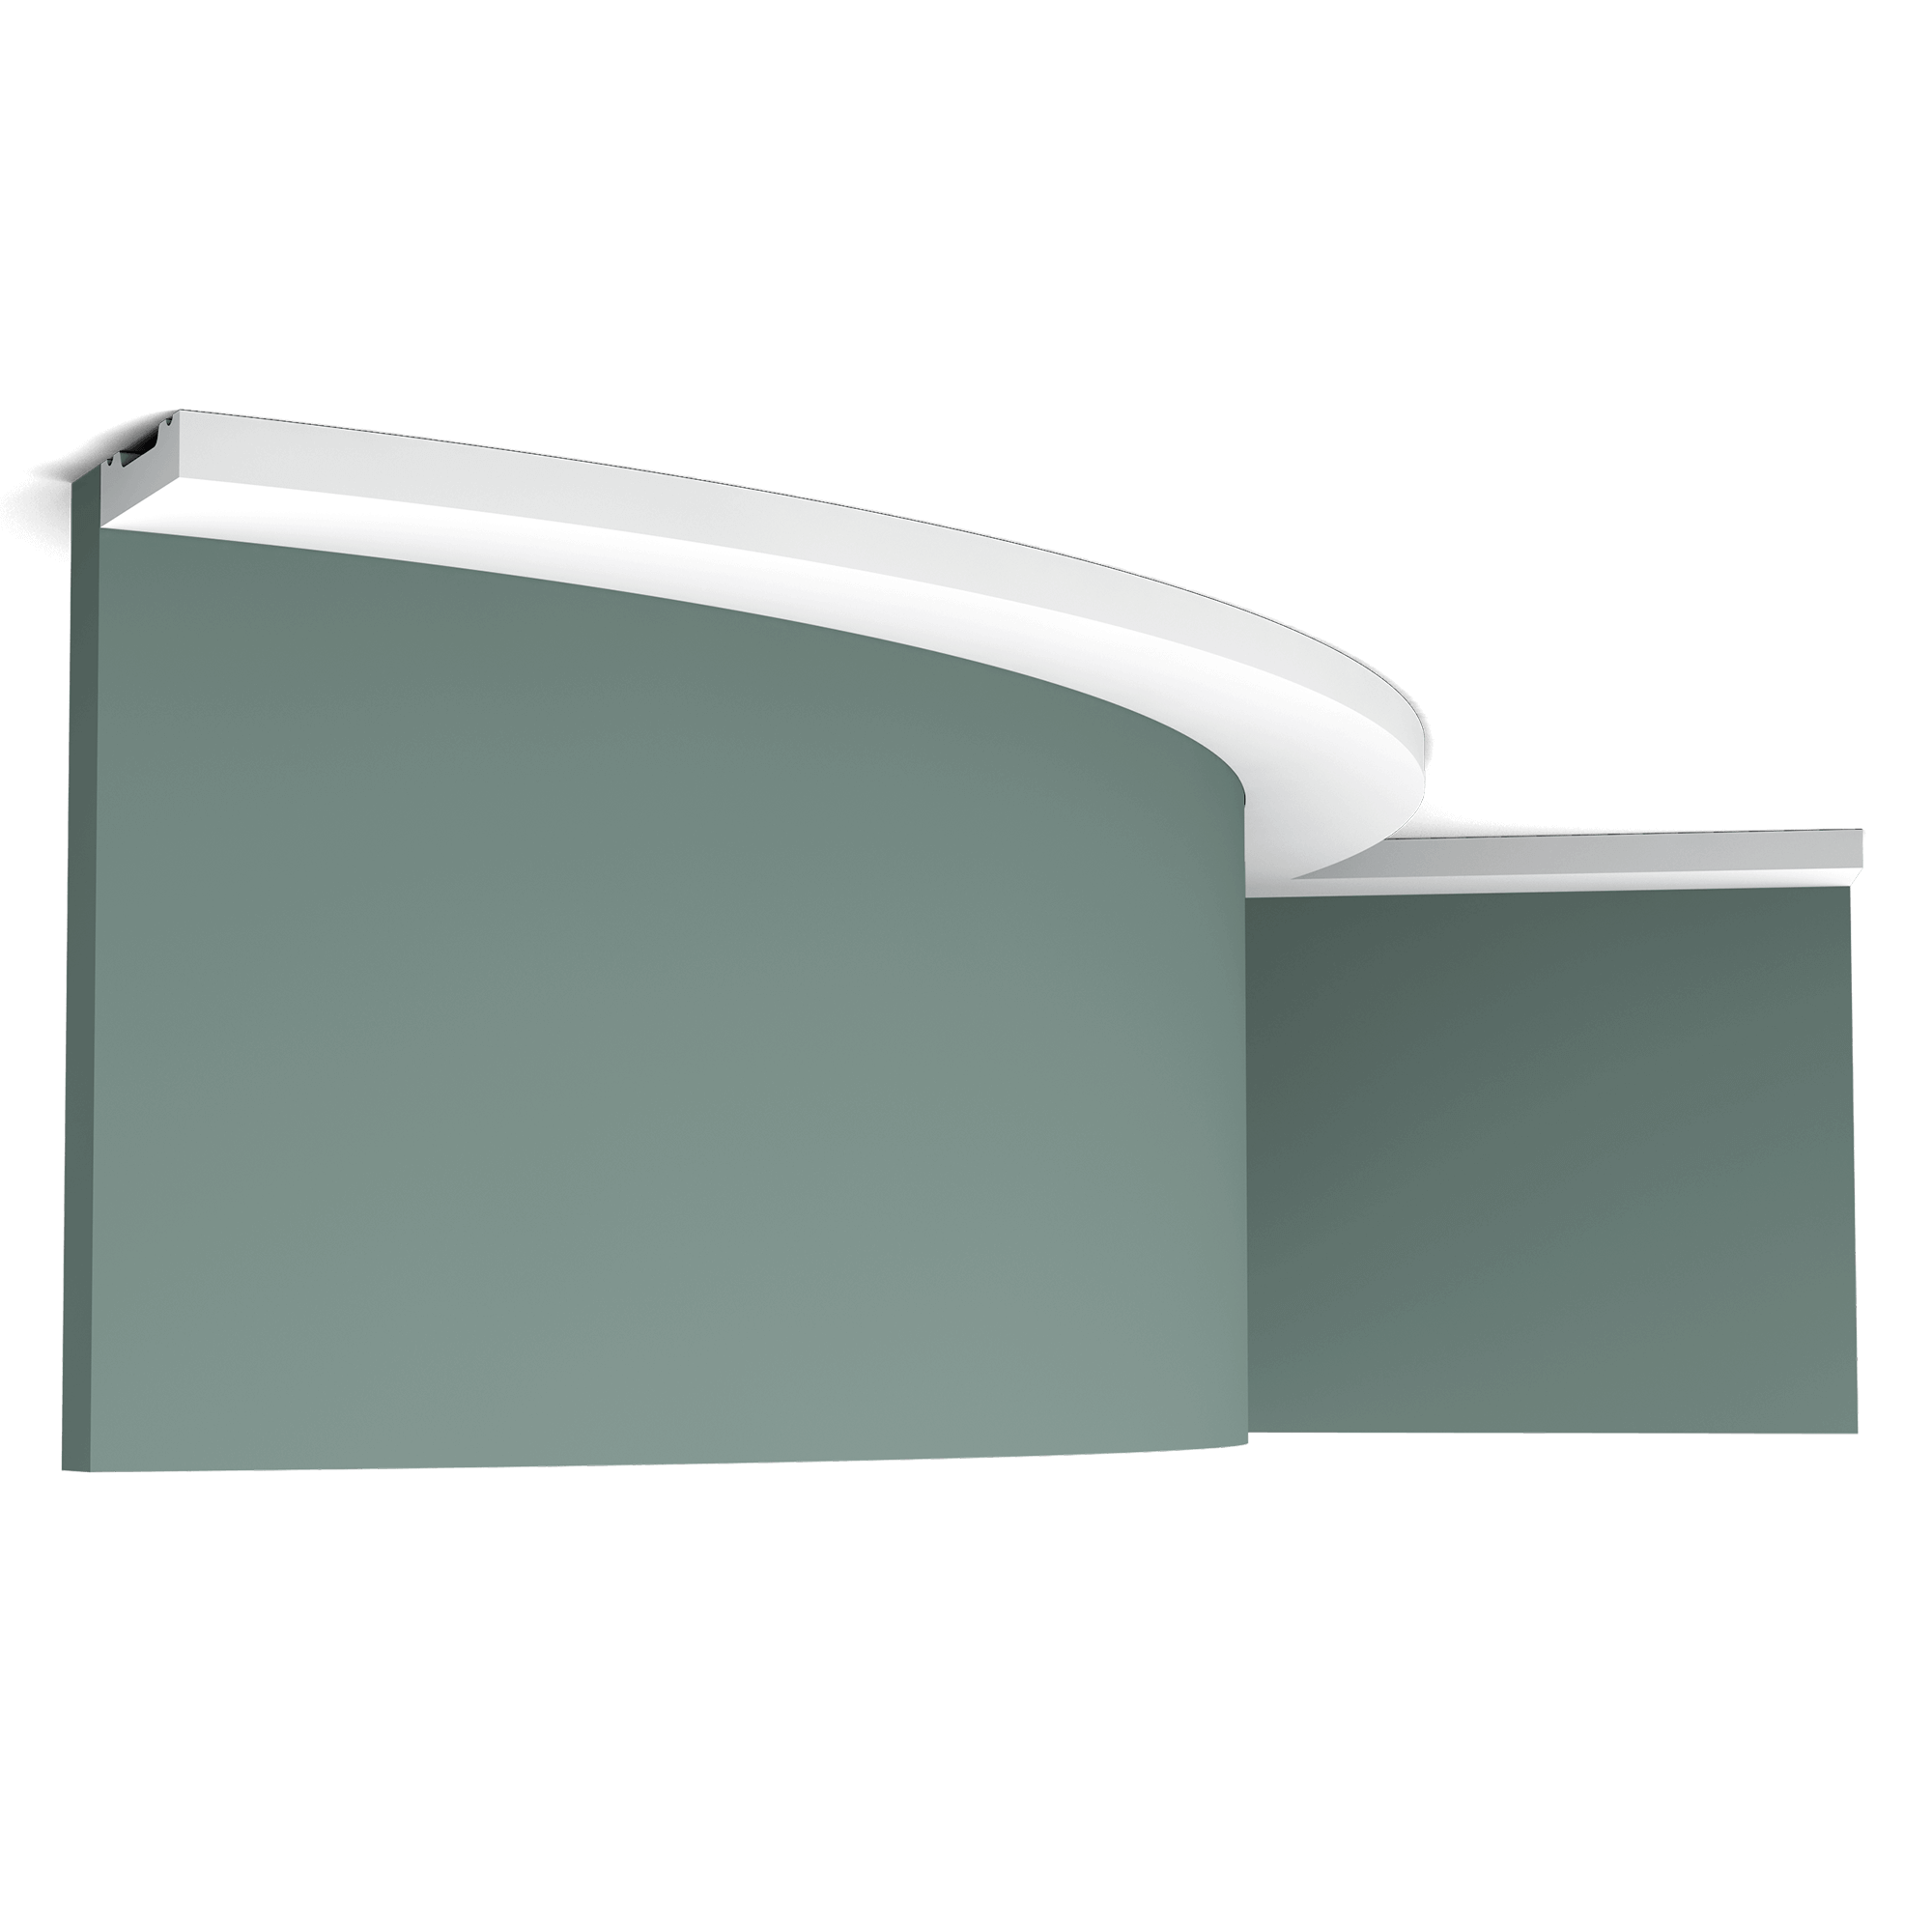 Flexible version of the SX162. Our simplest cornice moulding is part of the SQUARE family. Thanks to its Flex technology, curved walls and surfaces are no problem. Installation remark: It is necessary to screw this profile on the wall. Flex Radius: R min = 20 cm, R* min = 80 cm